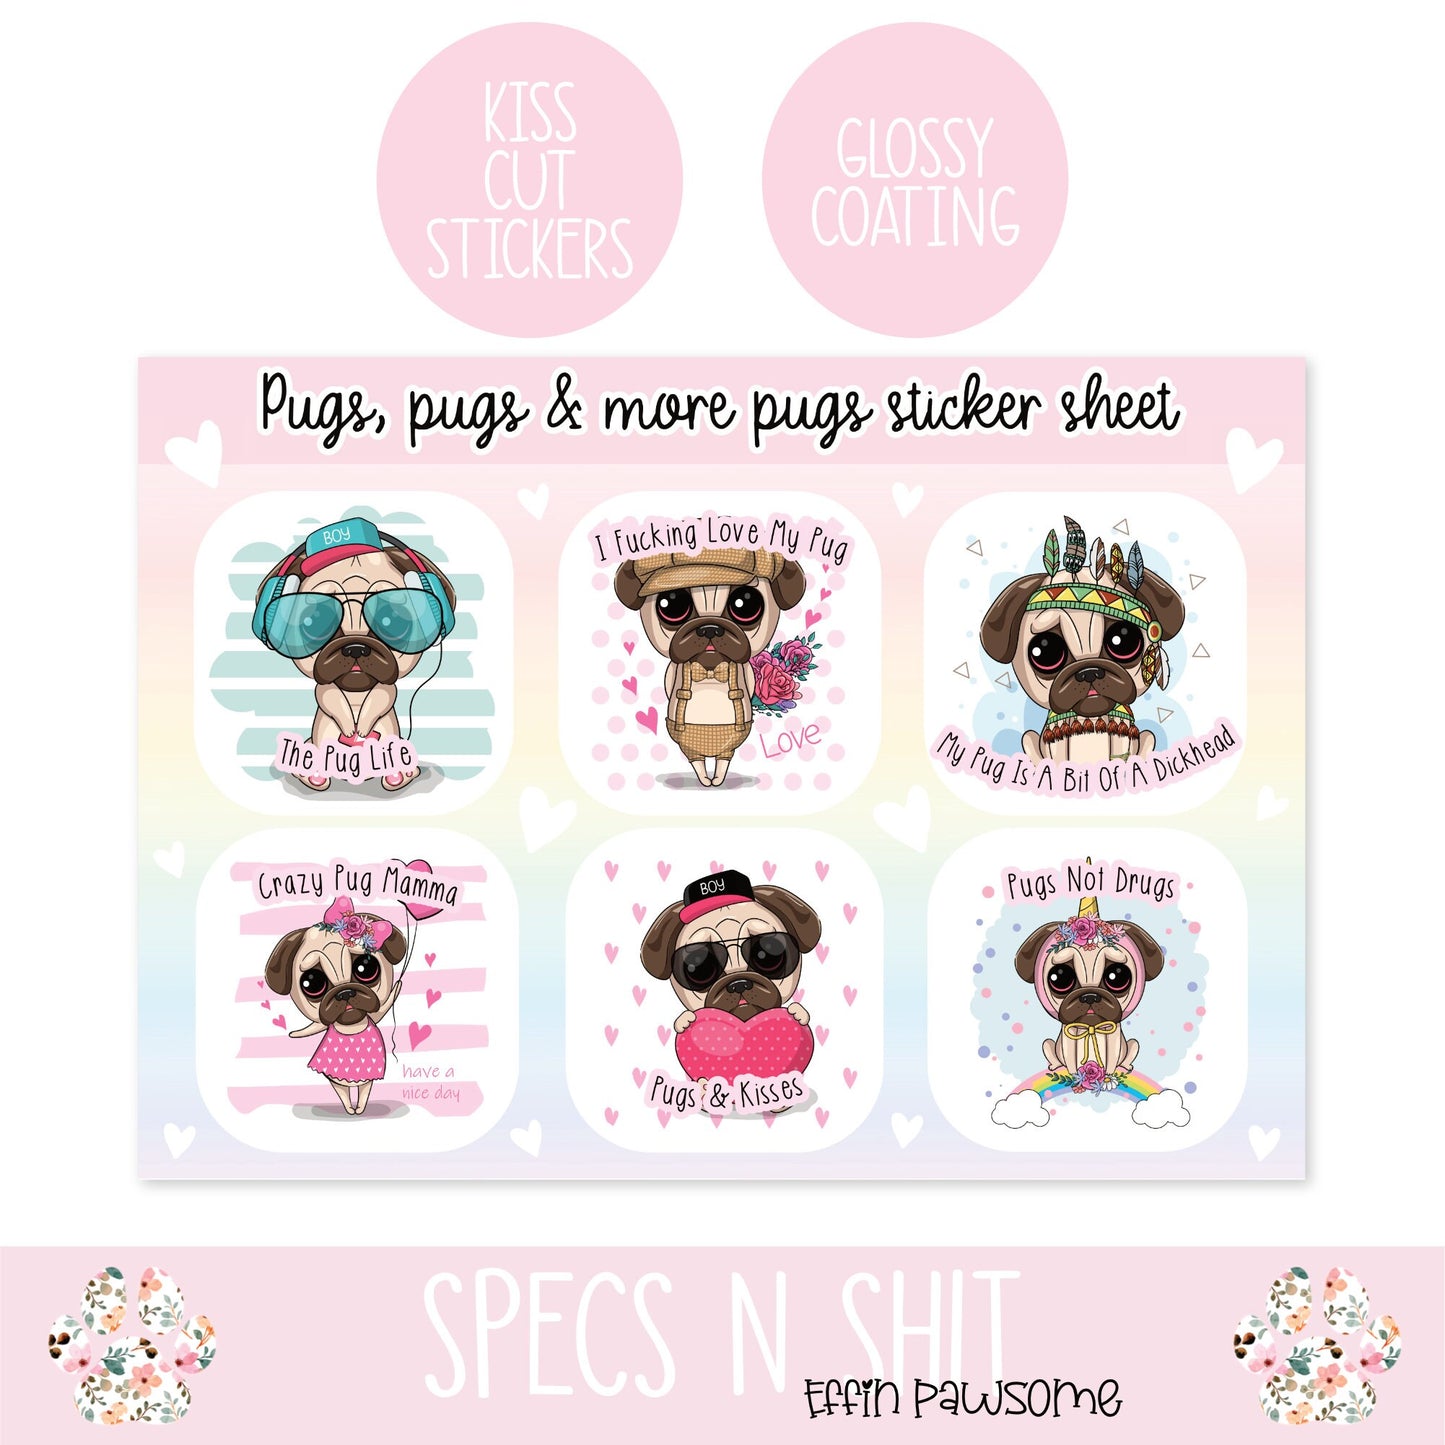 Funny Pug Sticker Sheet | Dog Stickers |Puppy stickers | Sticker Sheet | Journal Stickers | Novelty Gift Idea | Funny Decals | Dog Lovers